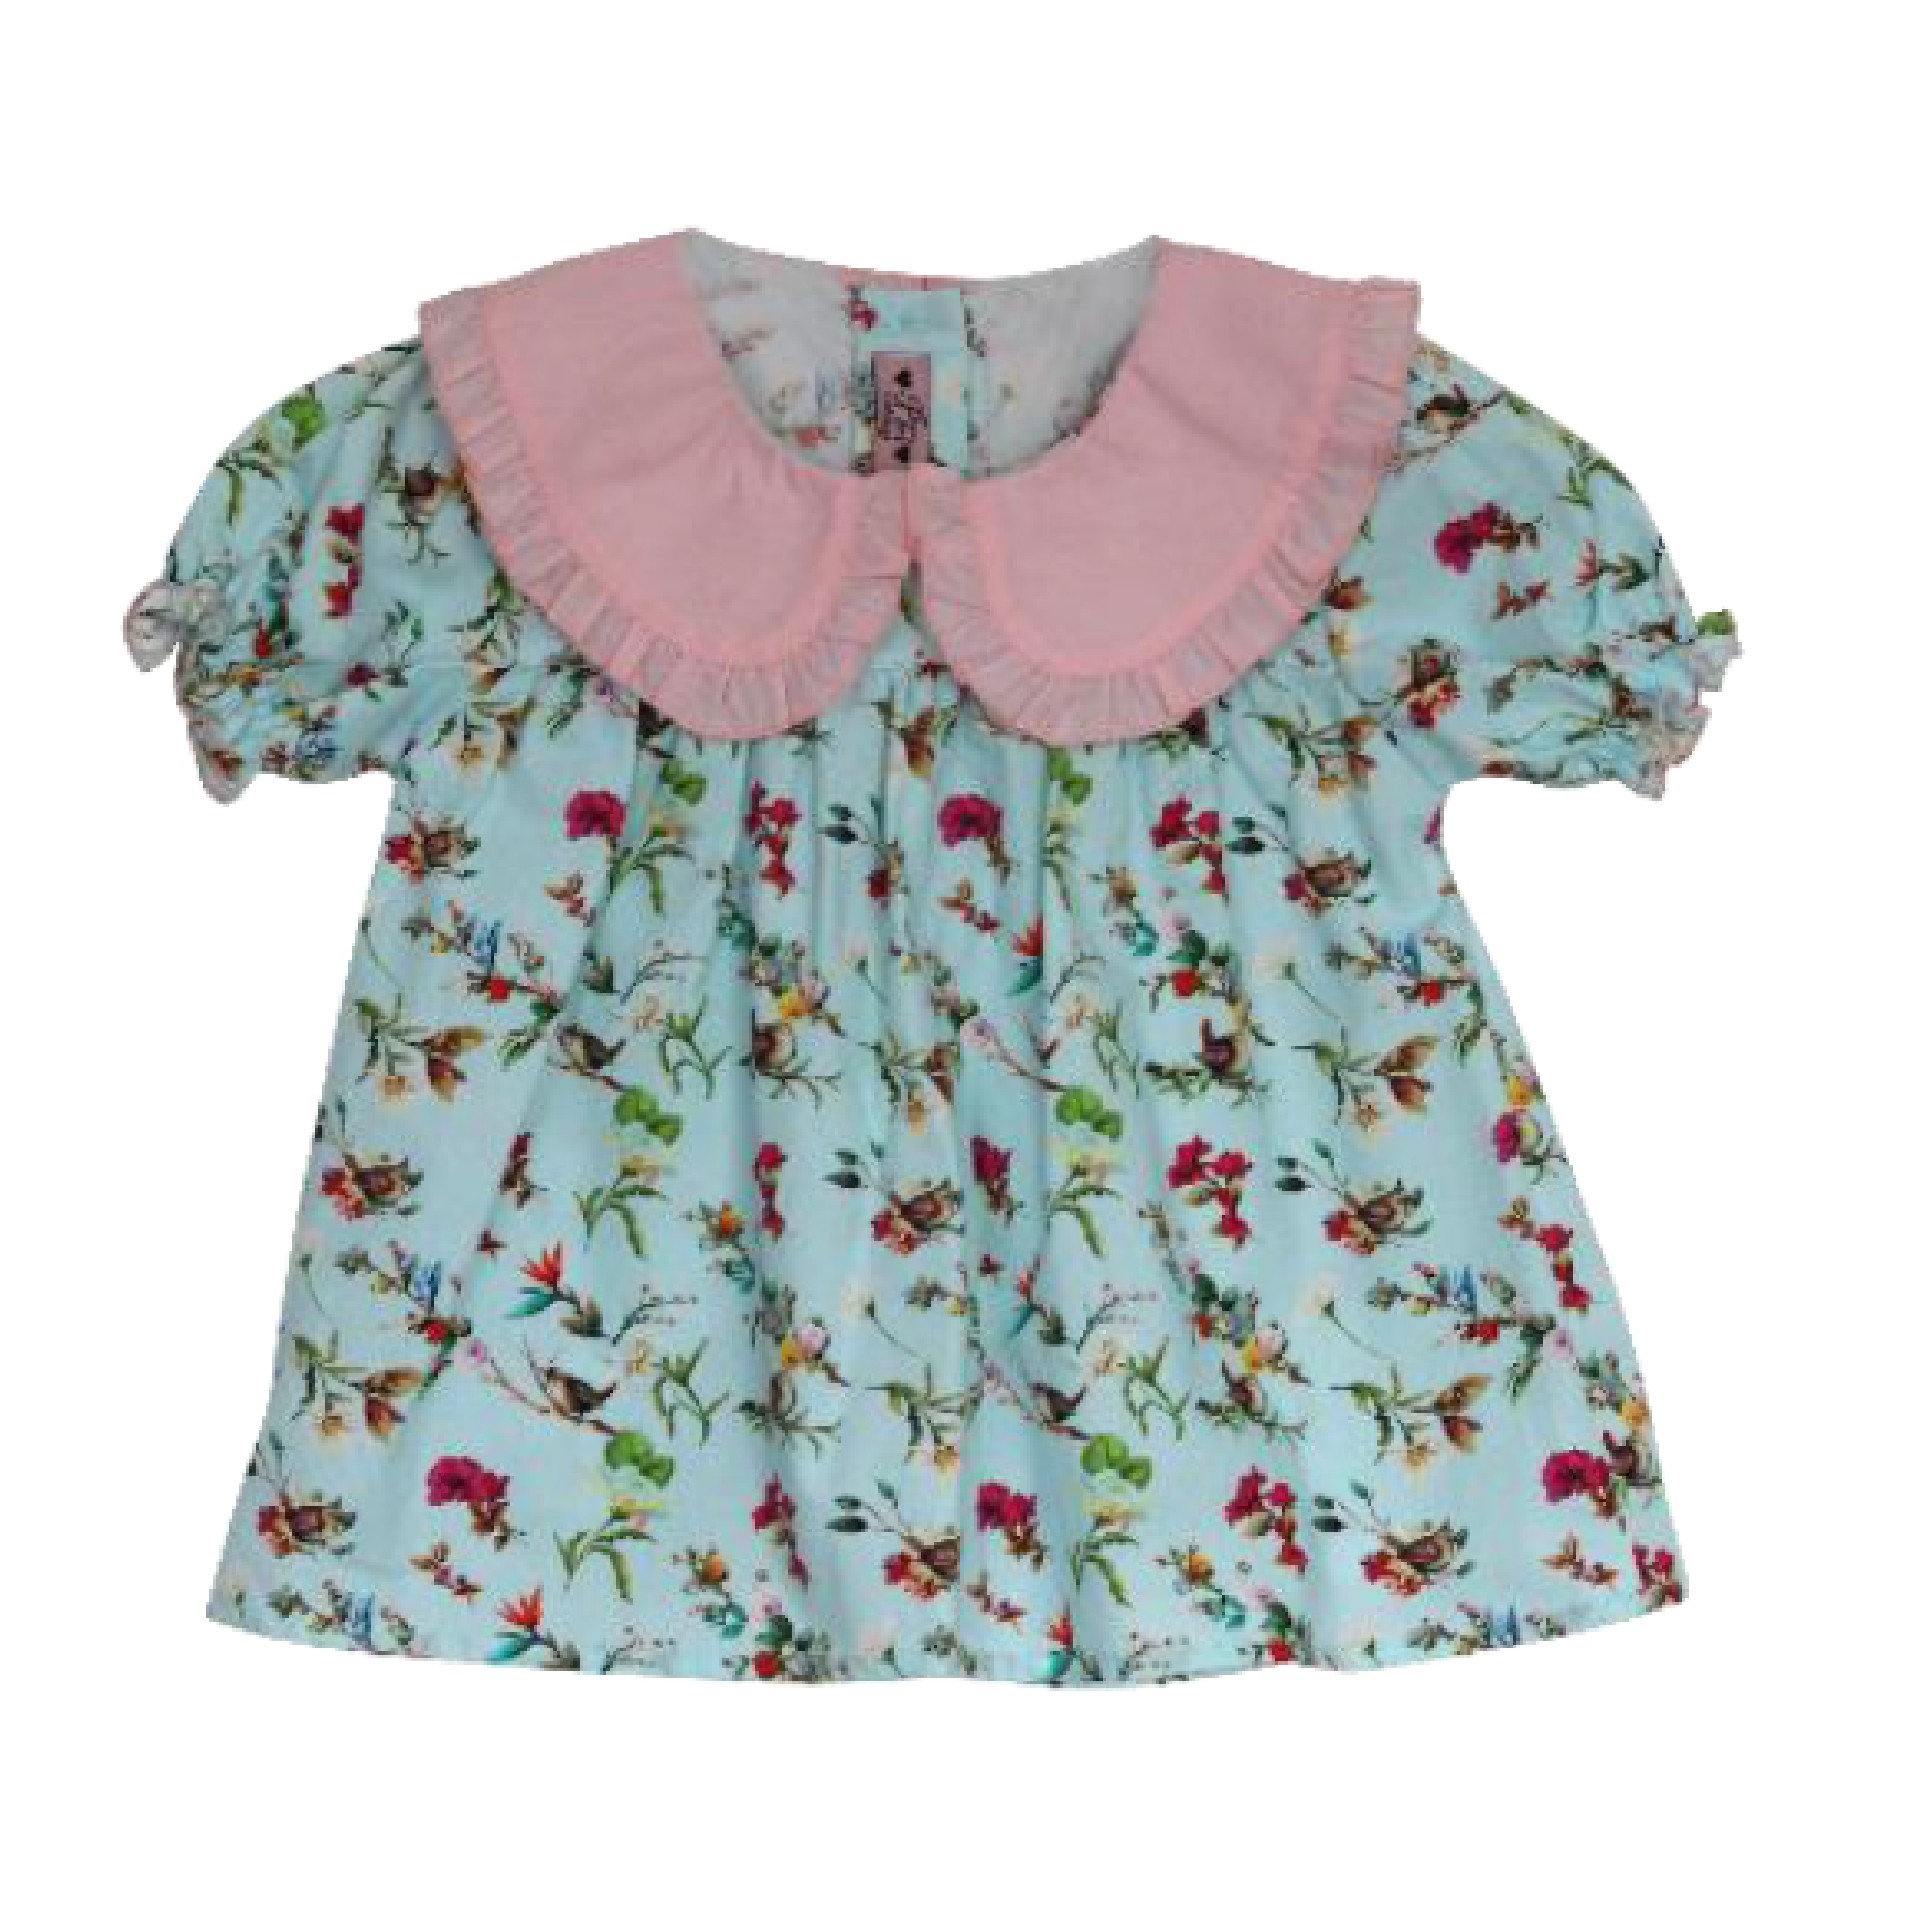 Blue with flowers collar blouse